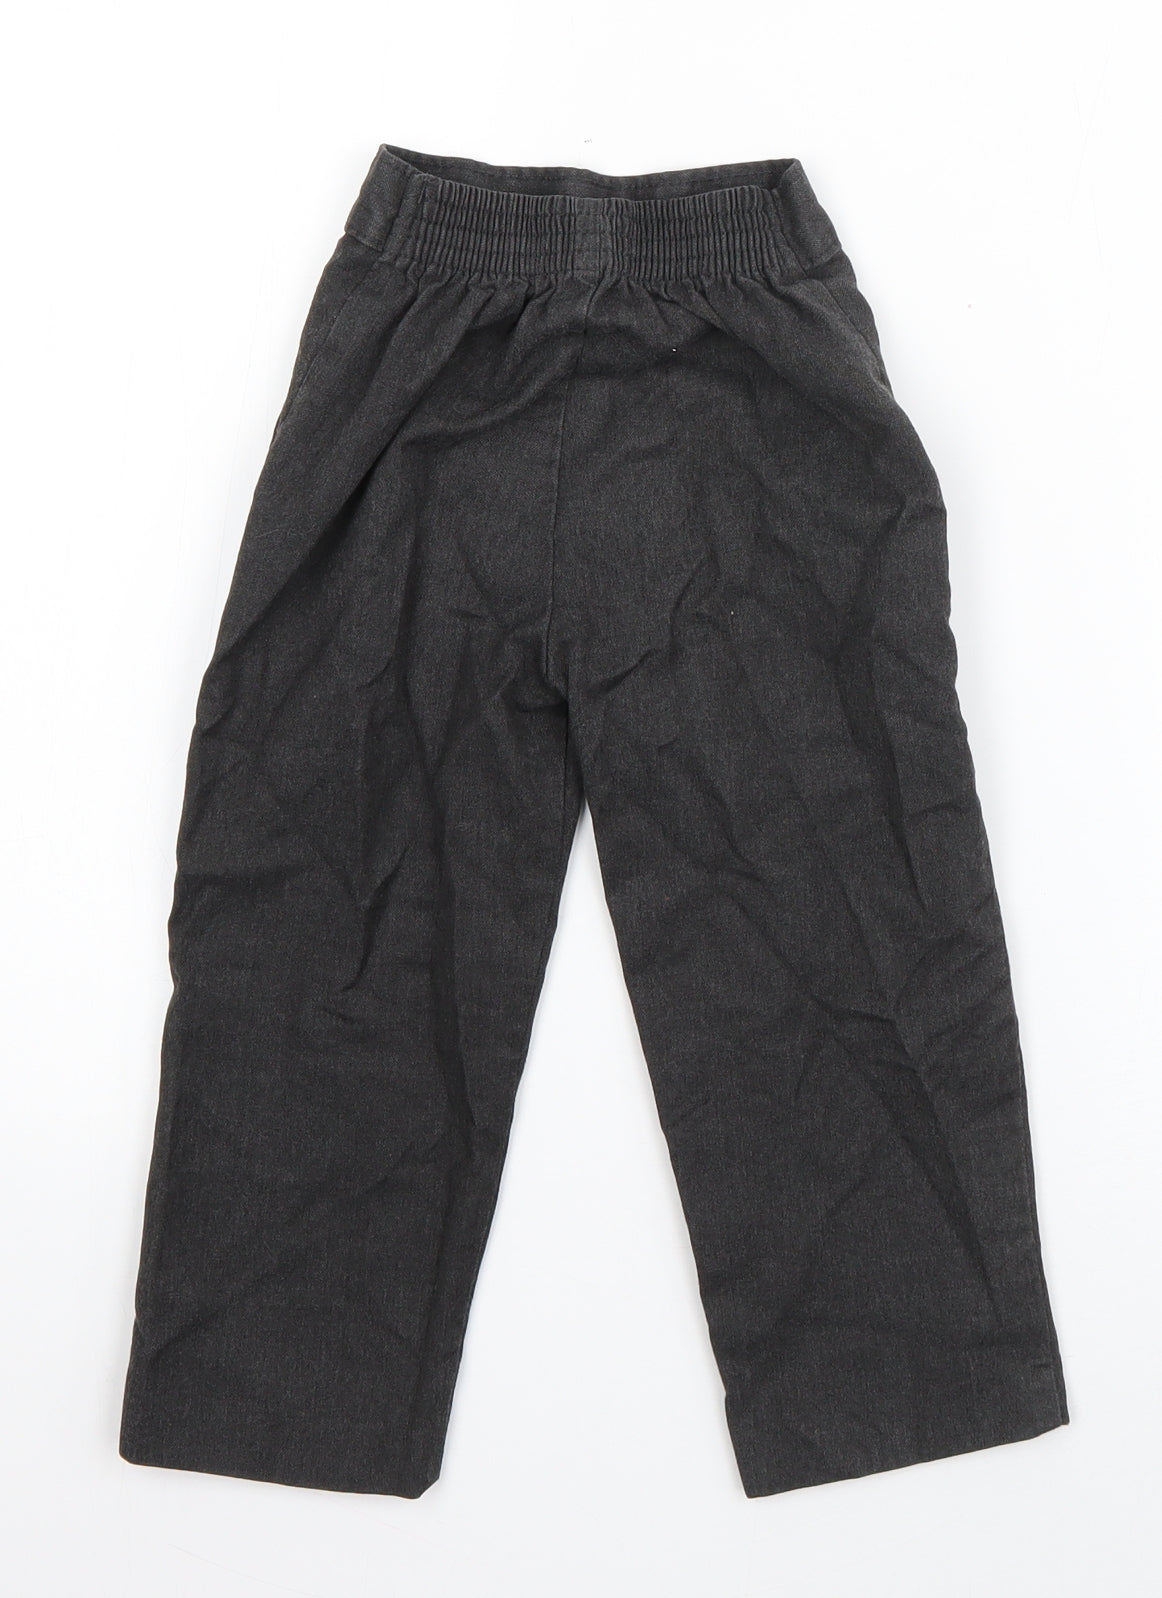 Preworn Boys Grey  Polyester Dress Pants Trousers Size 3-4 Years  Regular Pullover